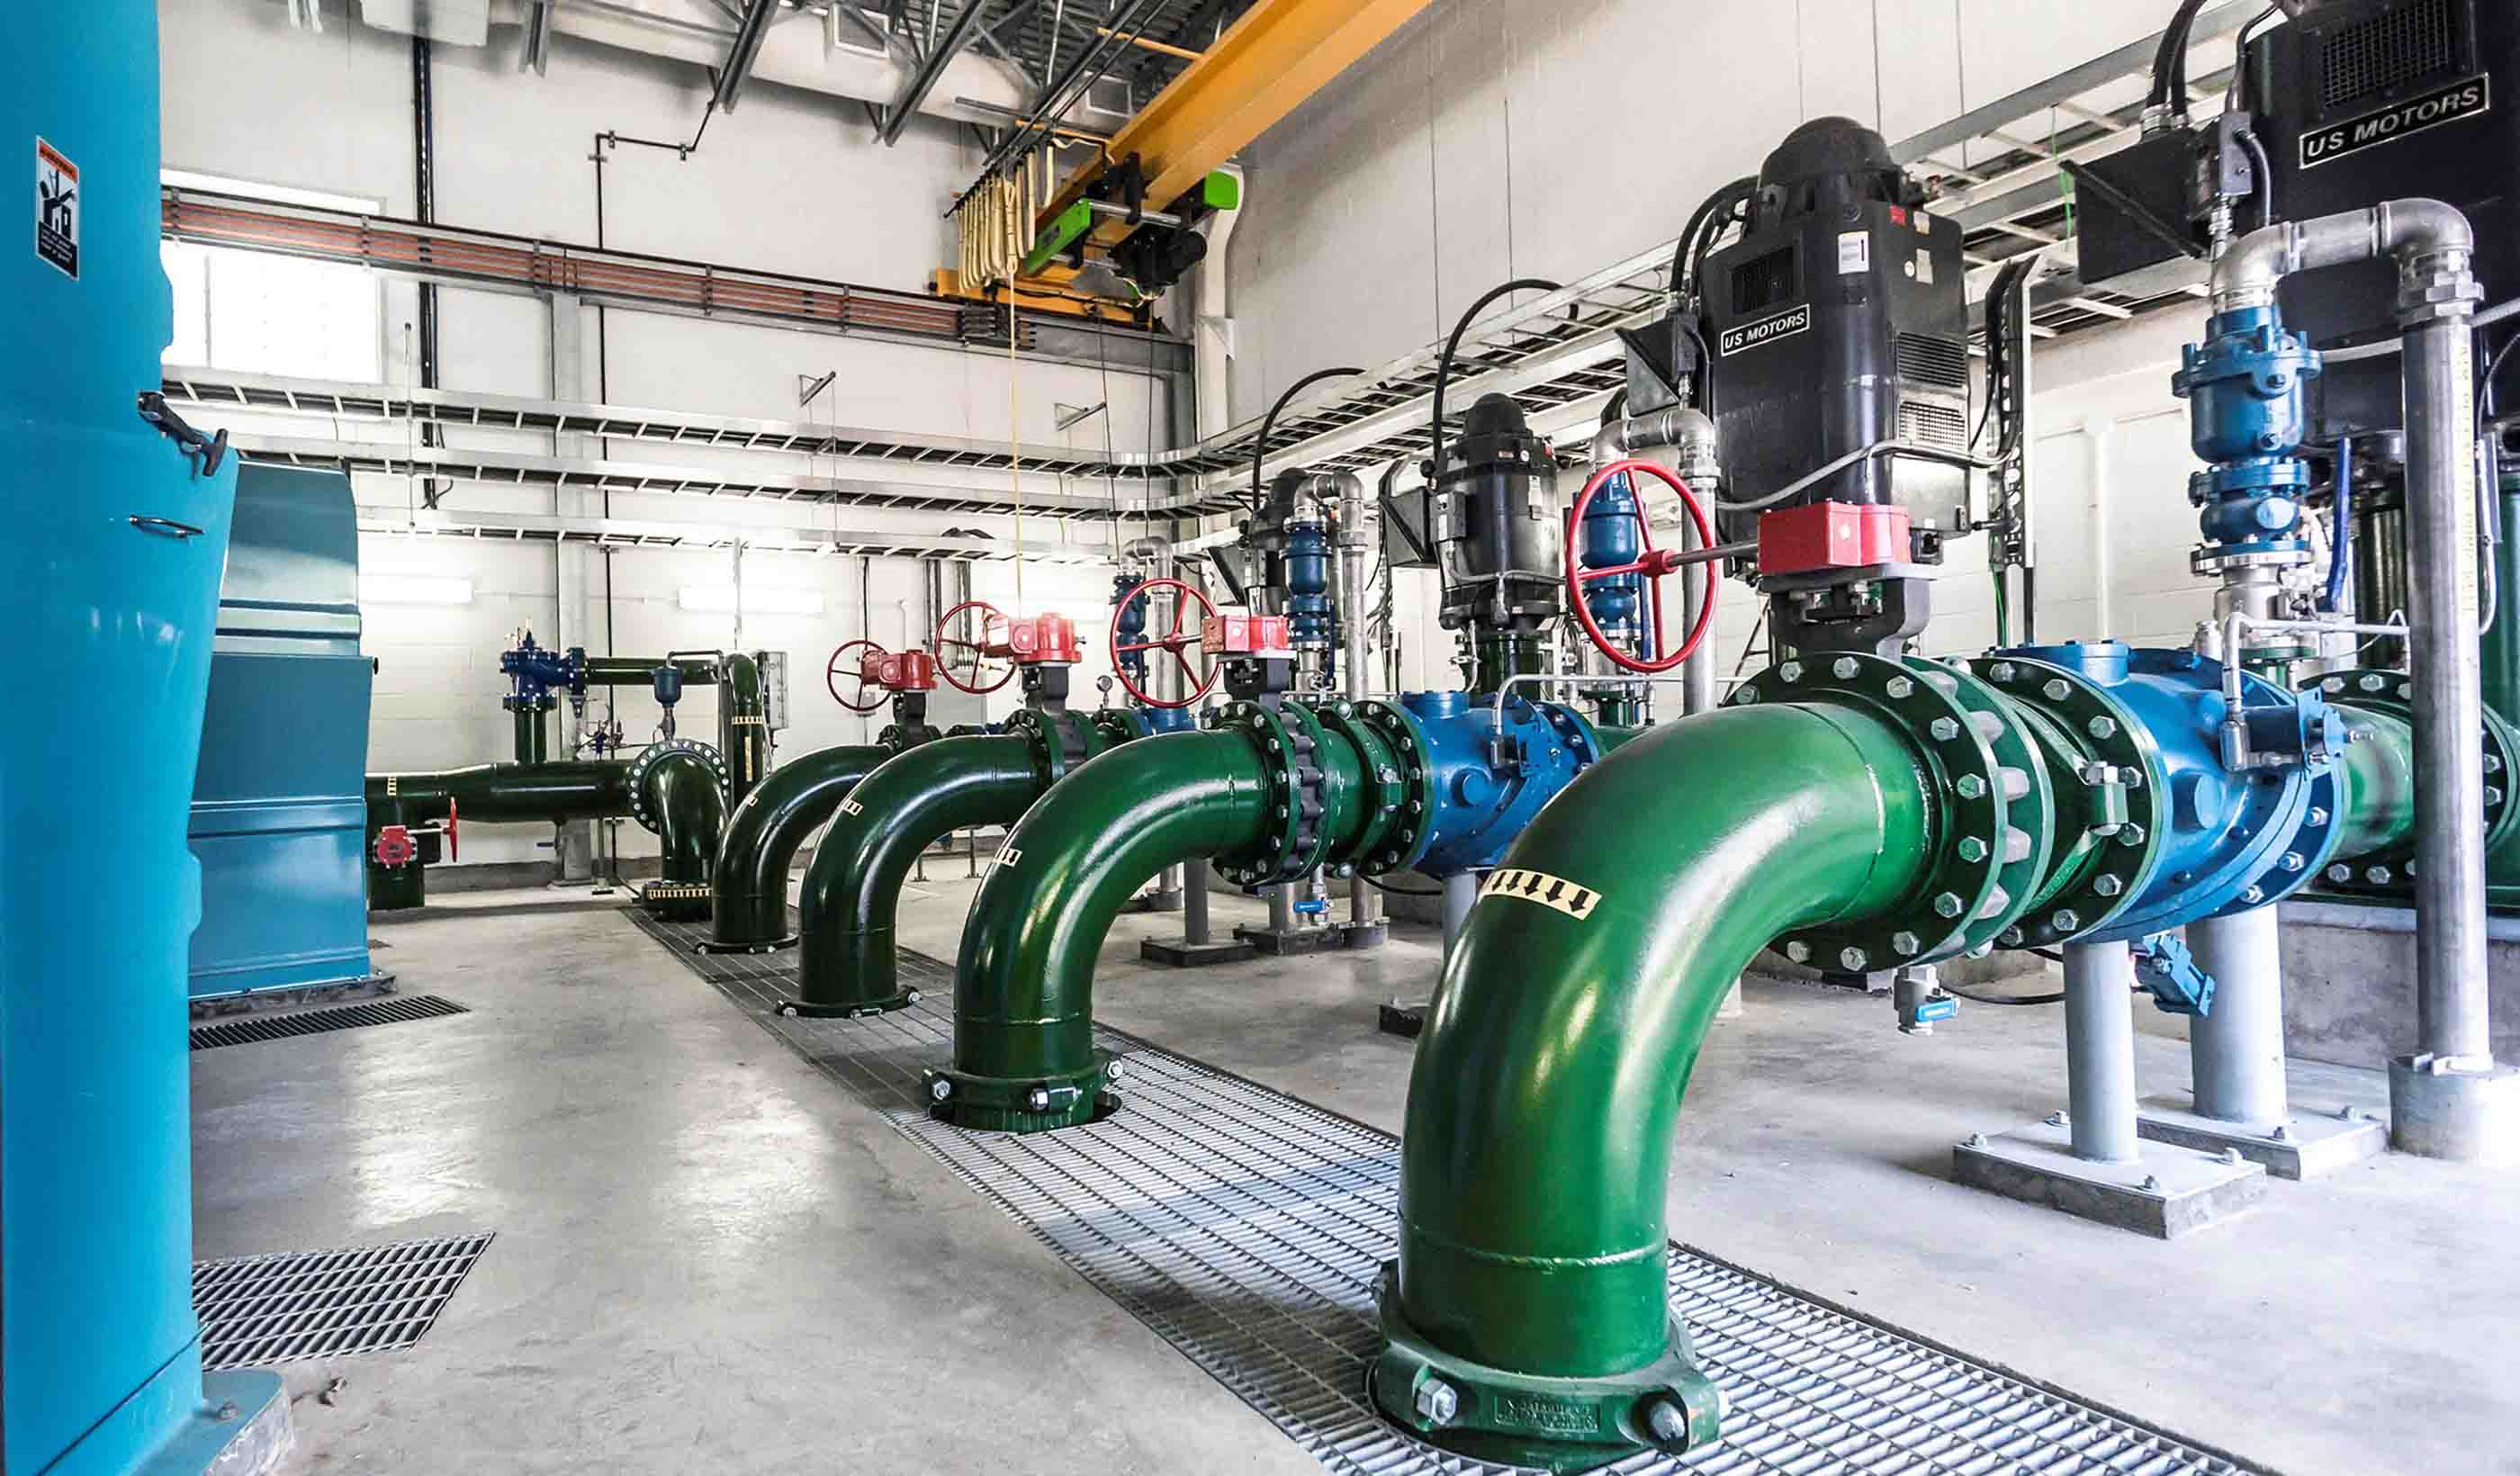 Published: TAP IN - ATCO's Heartland Industrial Water System